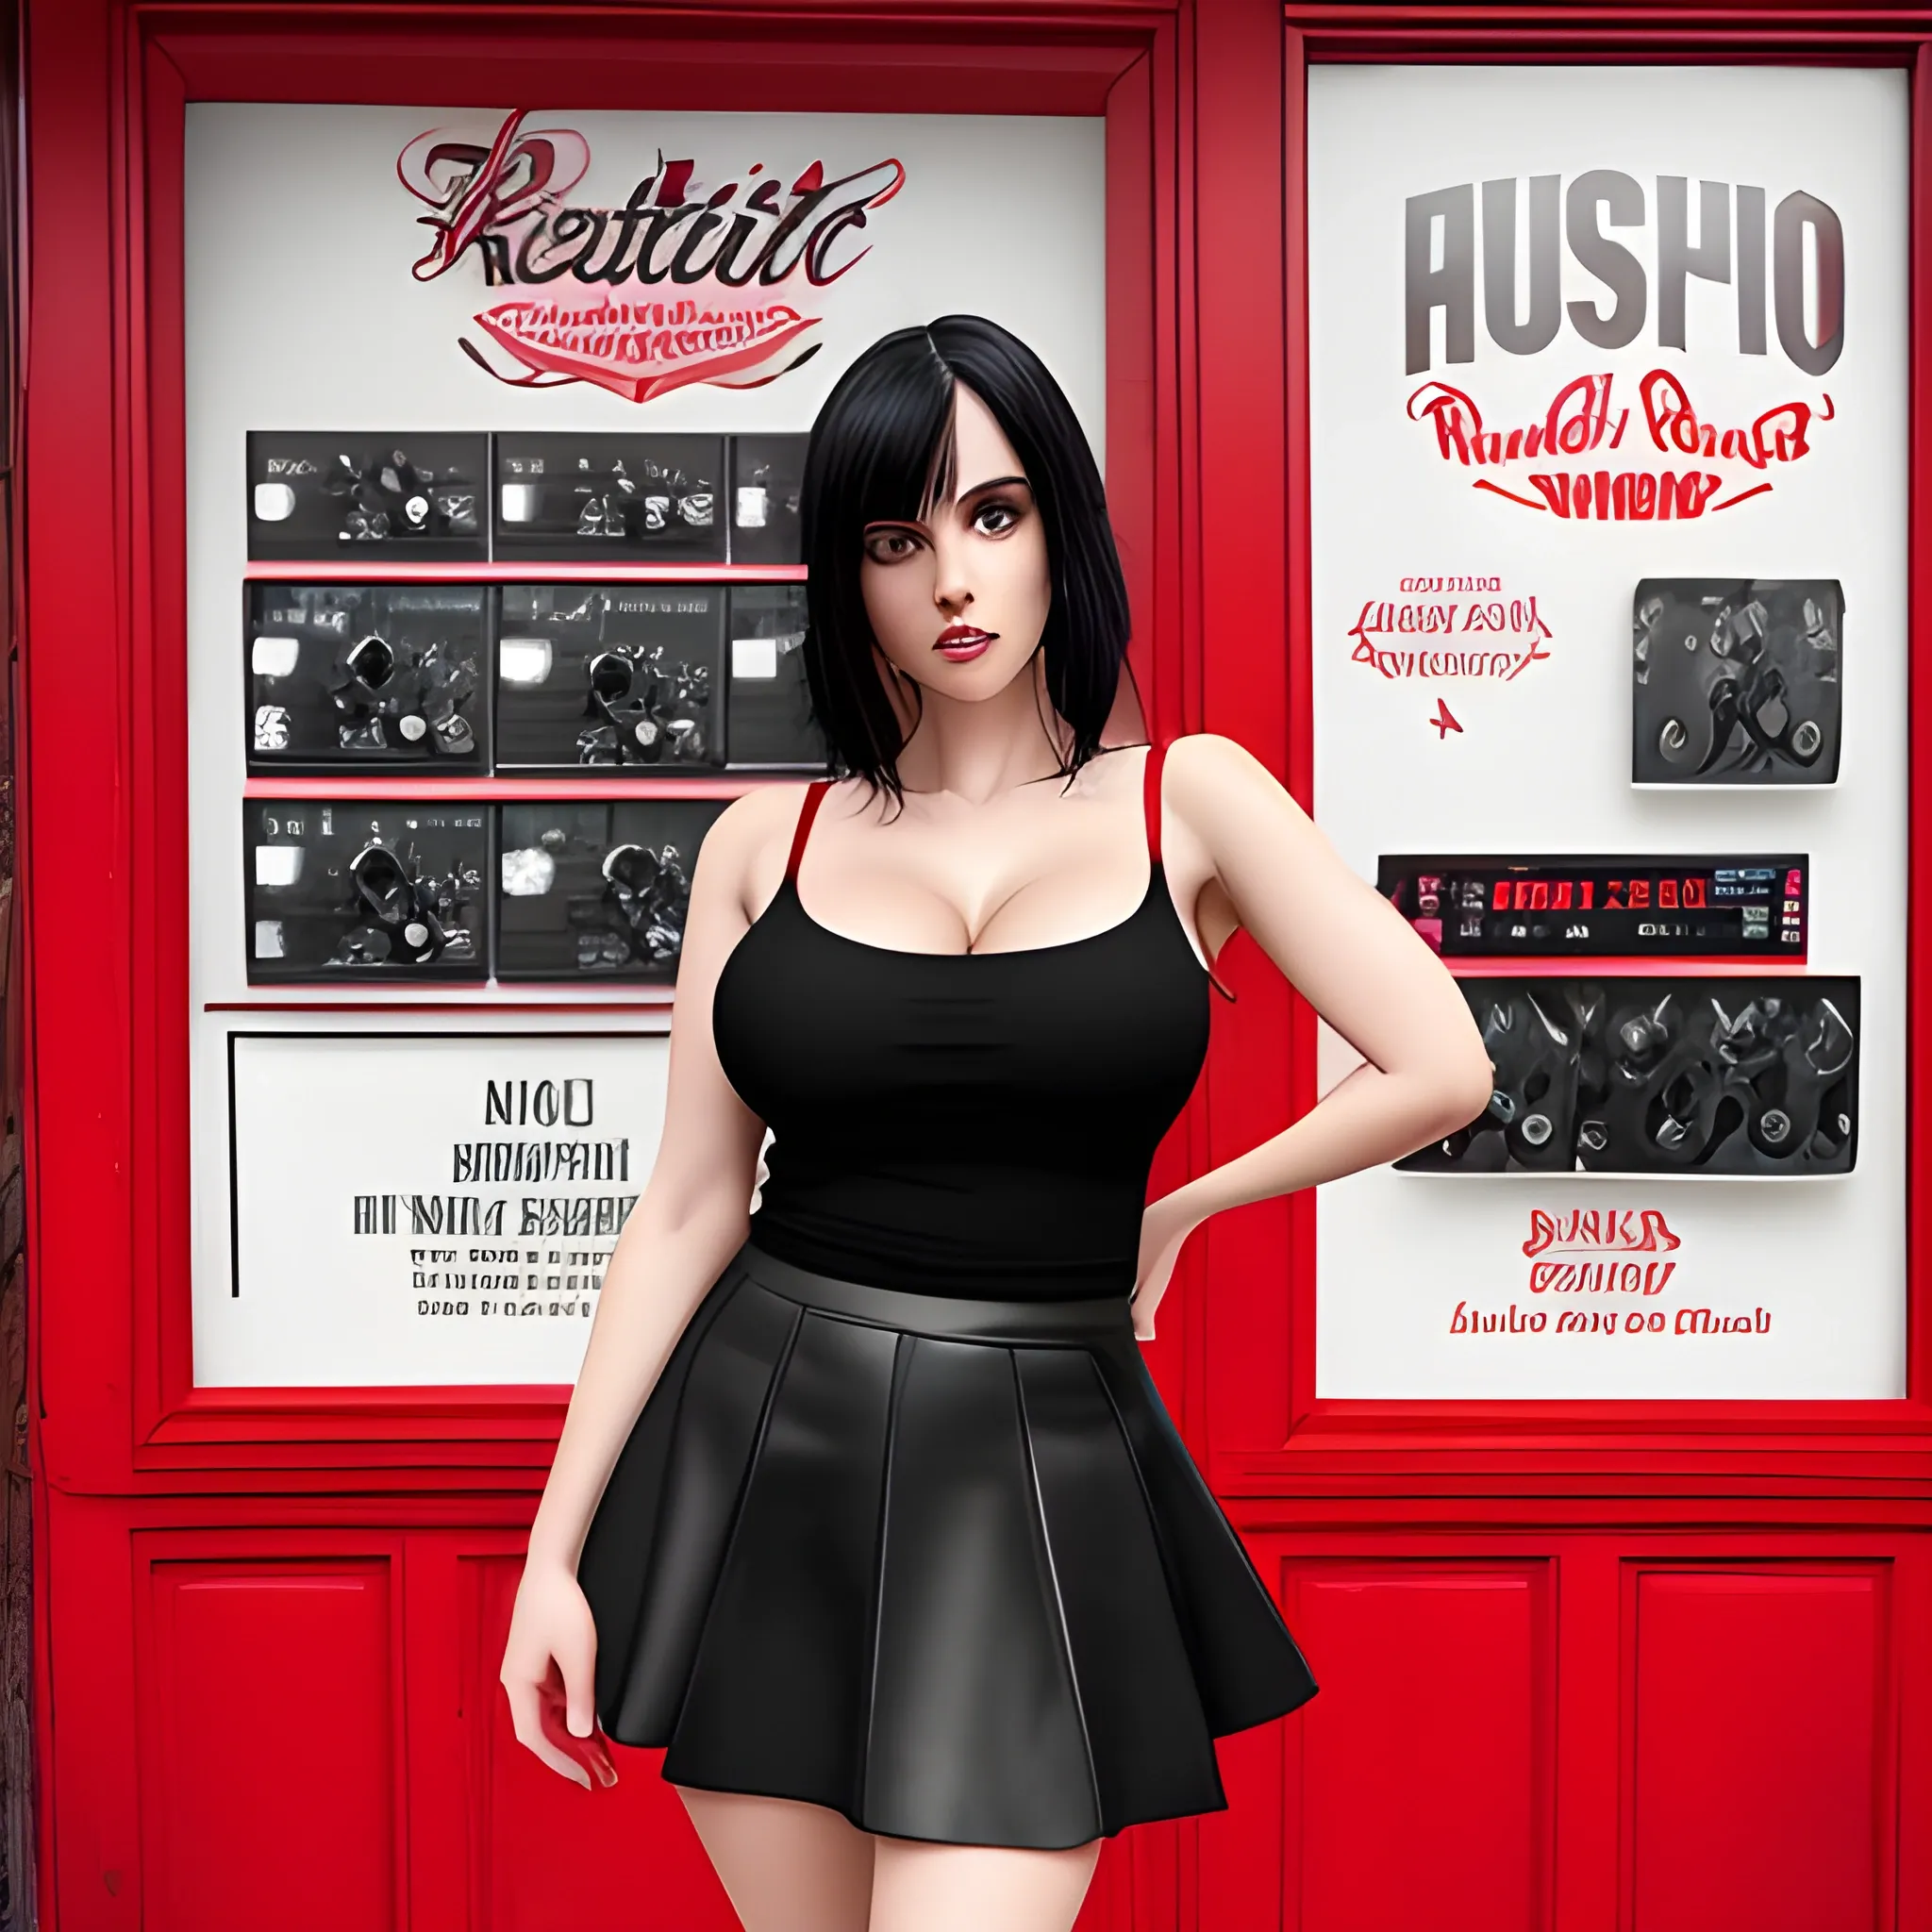 Realistic, true aesthetics, stylish fashion shot of a beautiful black haired woman, beautiful big breast, posing in front of a music store. wearing very high heeled red shoes, wearing a tight short red skirt, wearing a tight black top, Highly detailed, highest quality